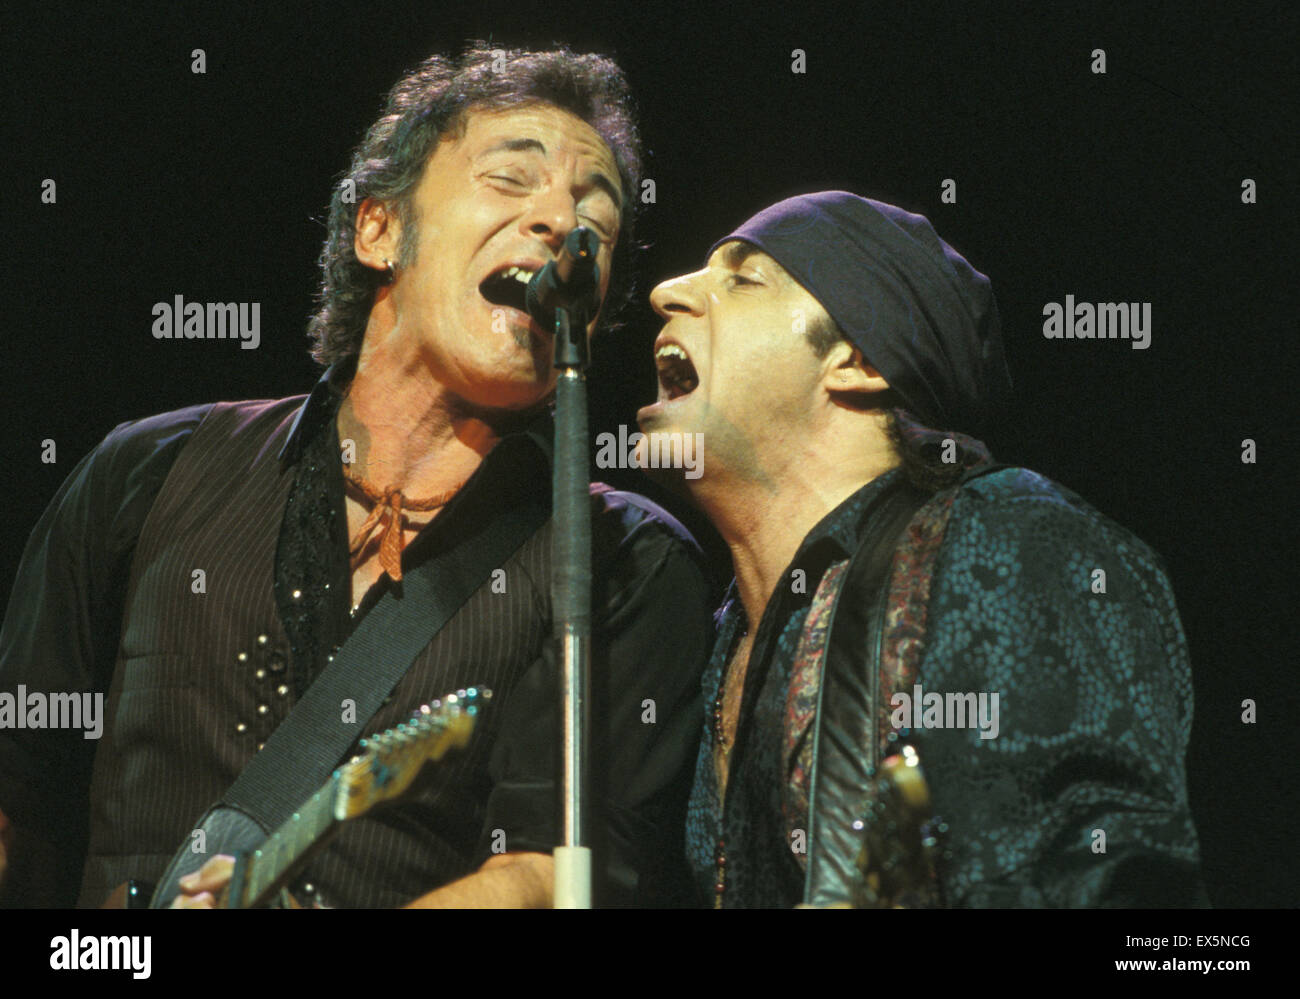 BRUCE SPRINGSTEEN  AND THE E STREET BAND US rock musician at the Dodger Stadium, Los Angeles 17 August 2003. Photo Jeffrey Mayer Stock Photo